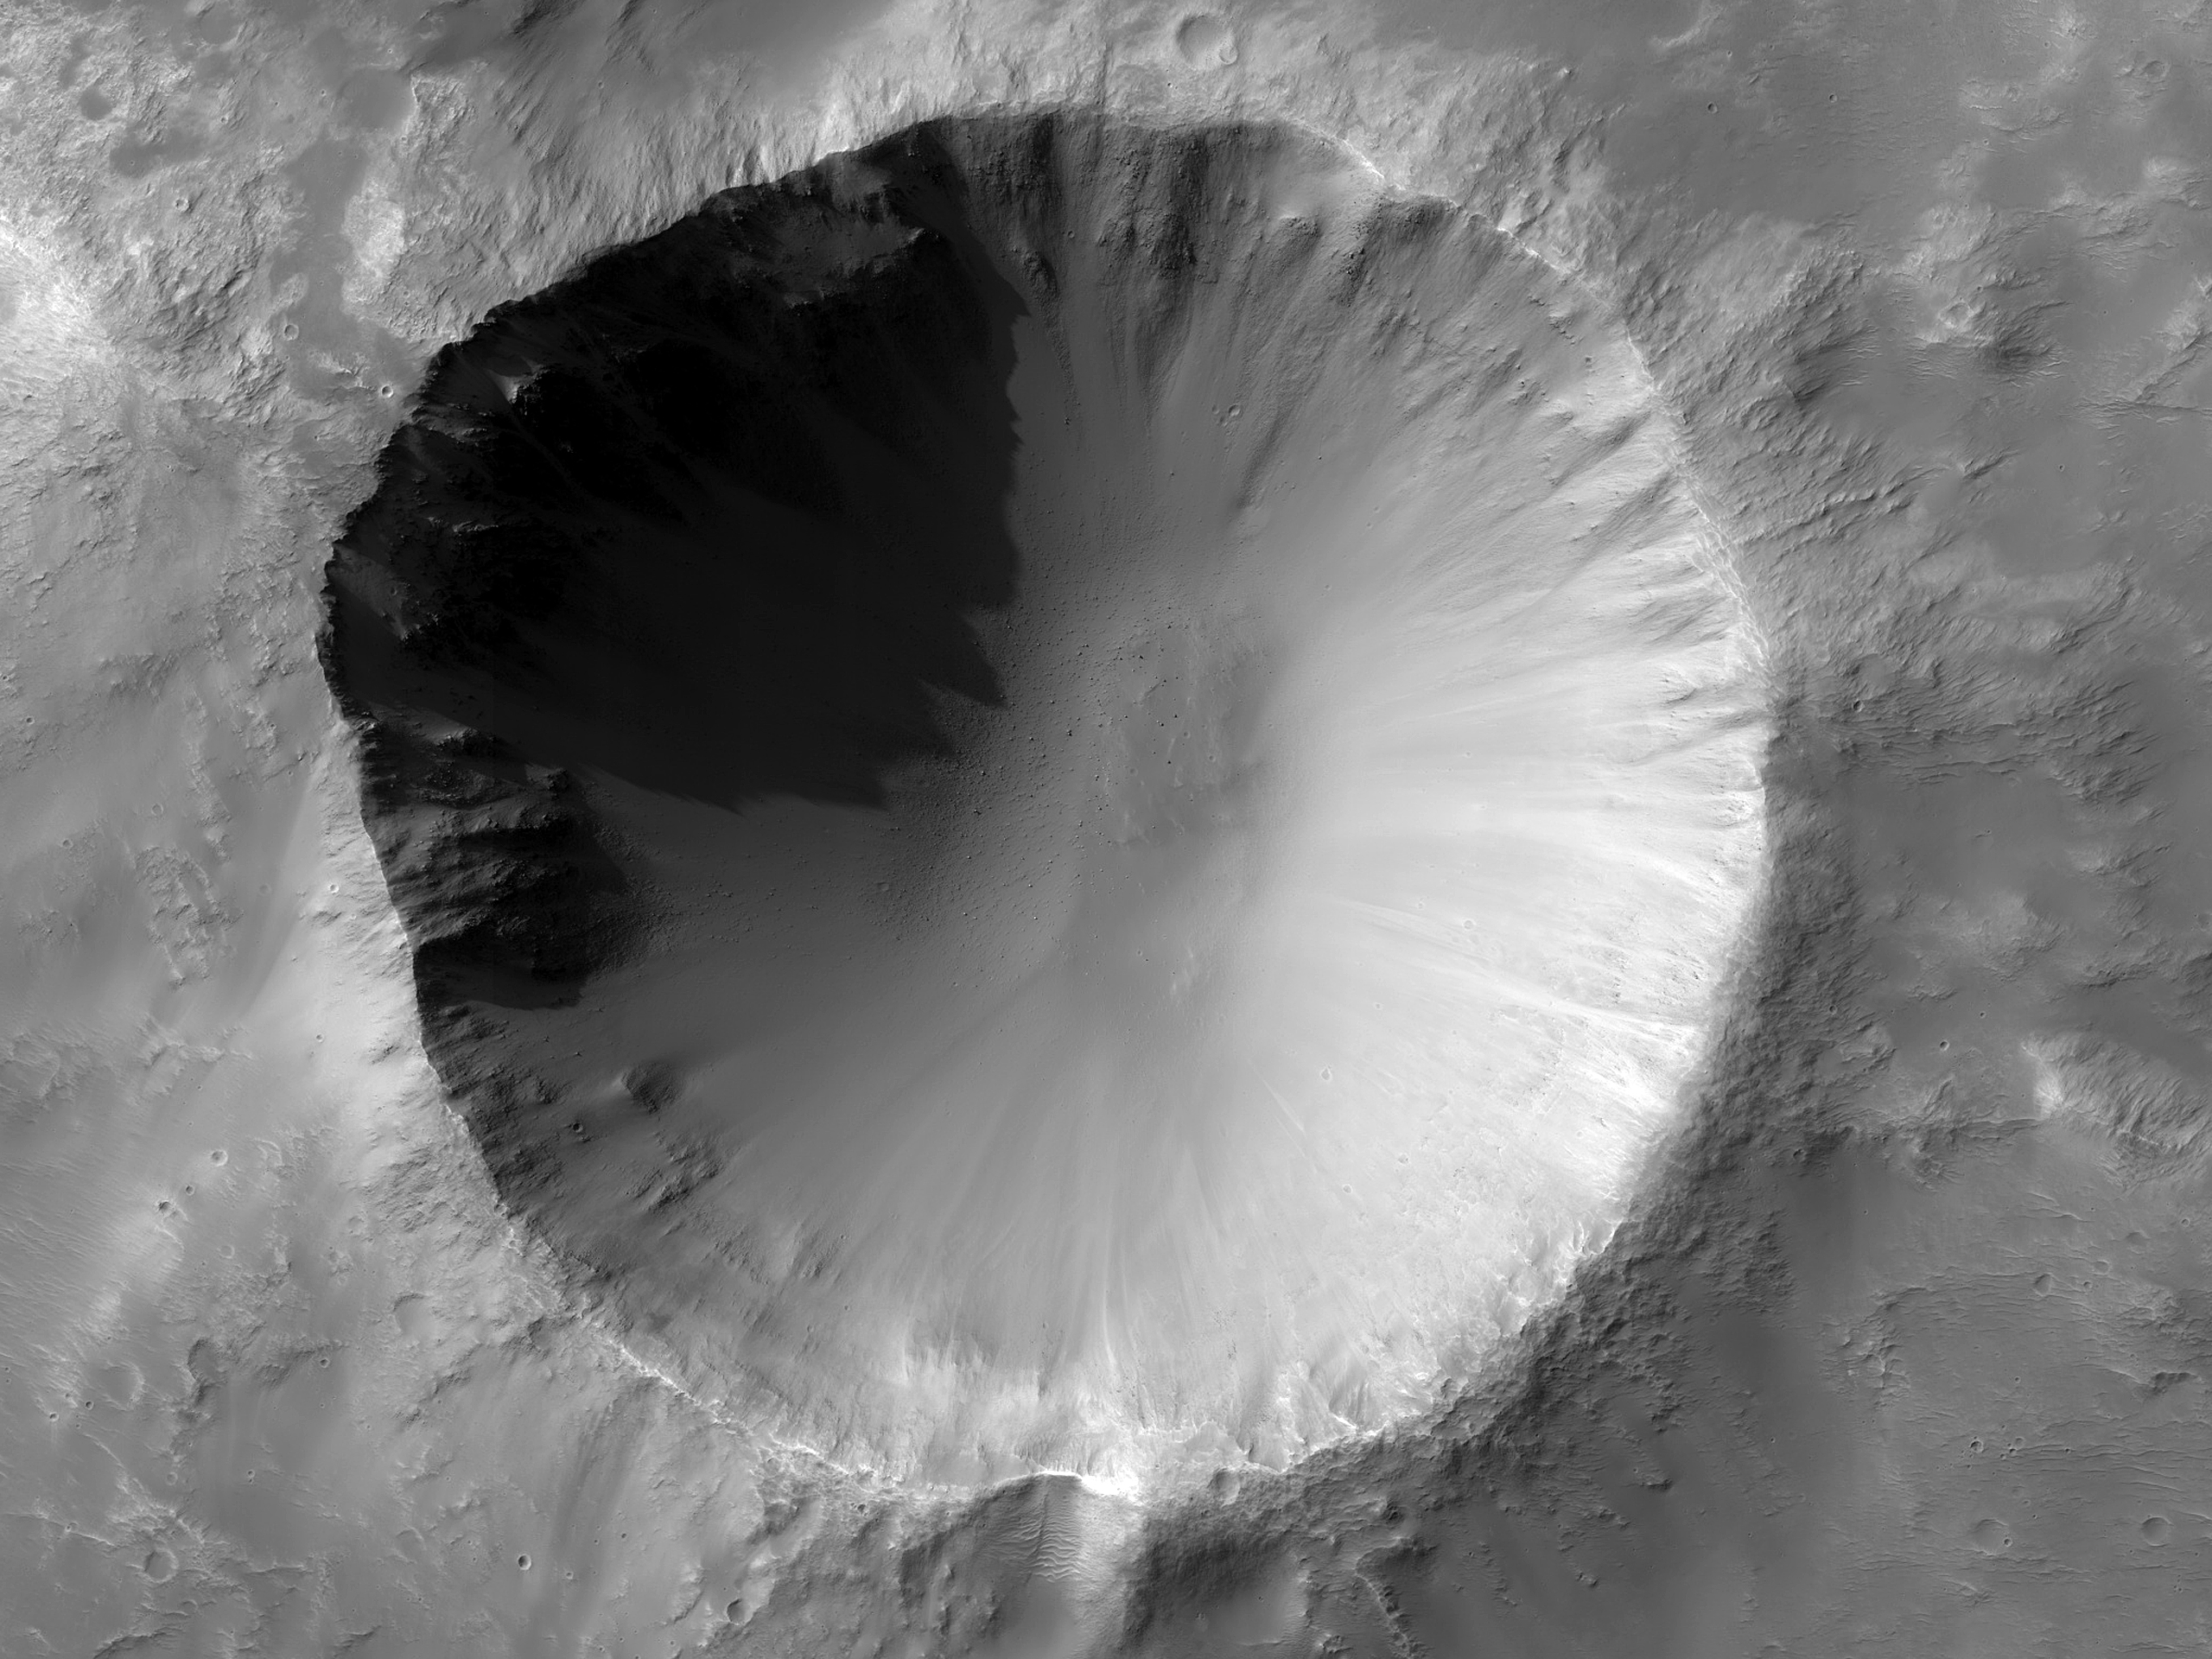 Crater Excavation of Uncommon Hydrous Minerals